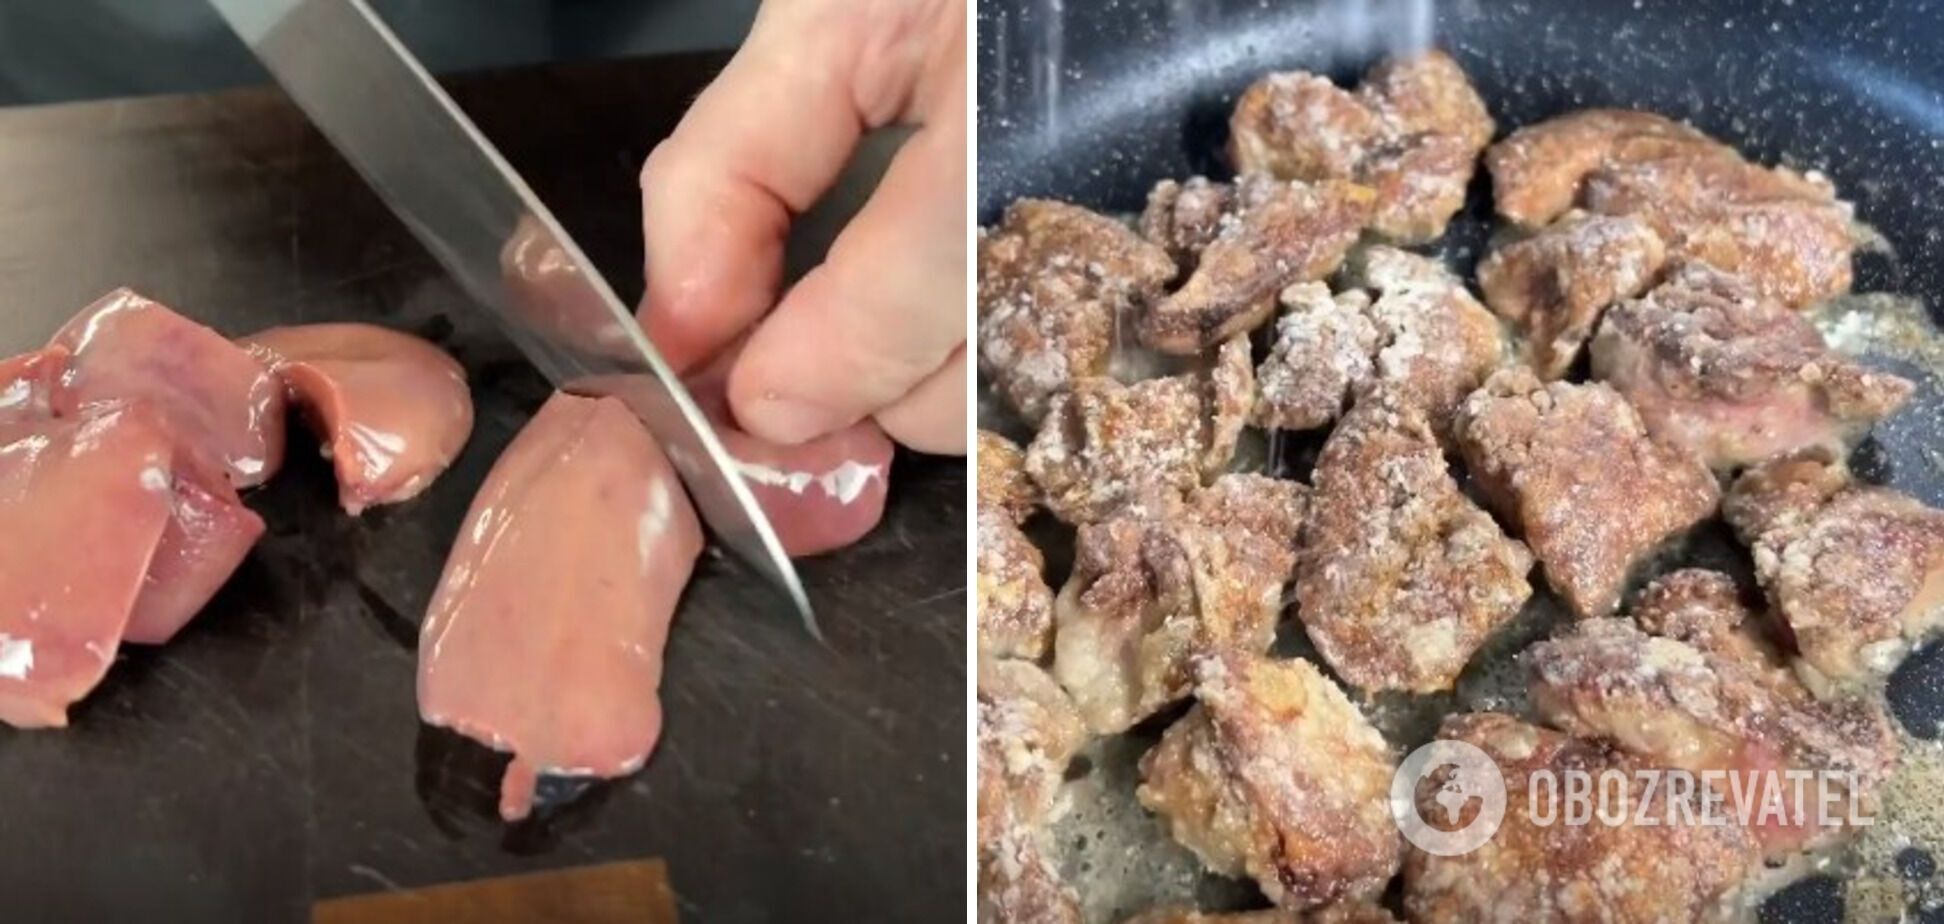 How to fry liver properly